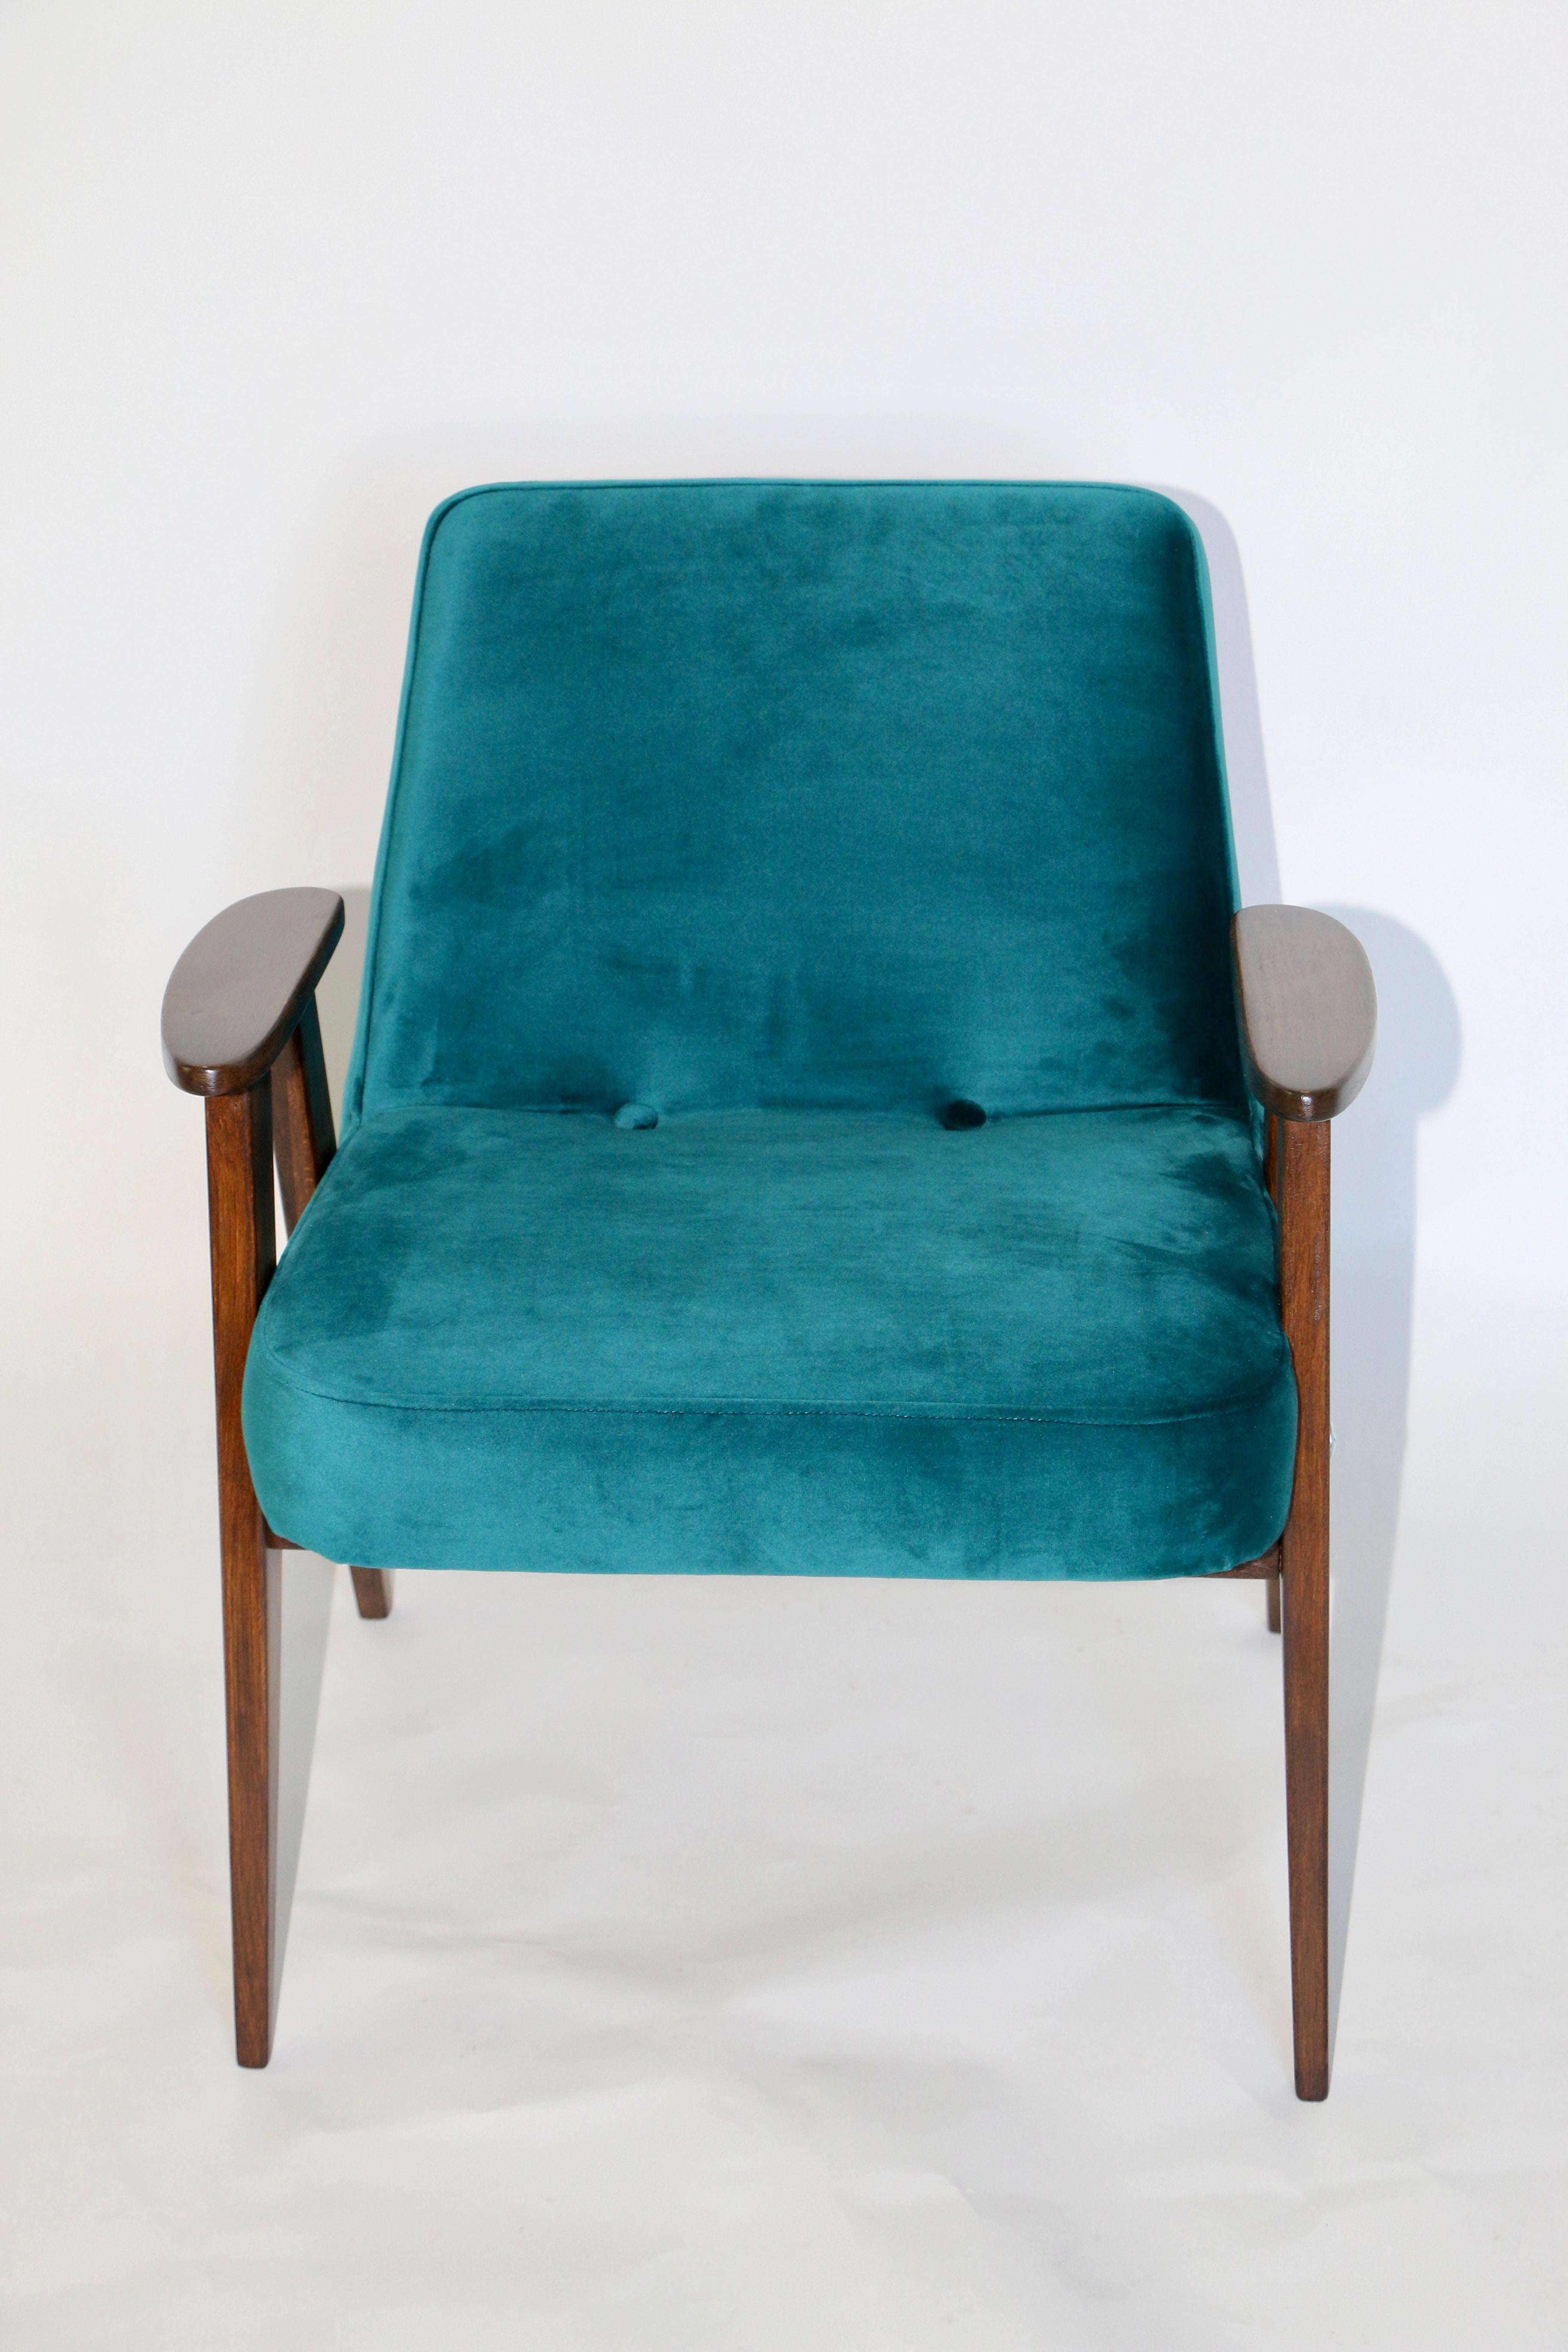 Polish 366 armchair design by Jozef Chierowski in green made velvet from 1970s, new upholstery covered with velvet fabric in fashionable dark green color, finished with wooden chair cushion. Wooden elements in dark oak color. Perfect condition. This